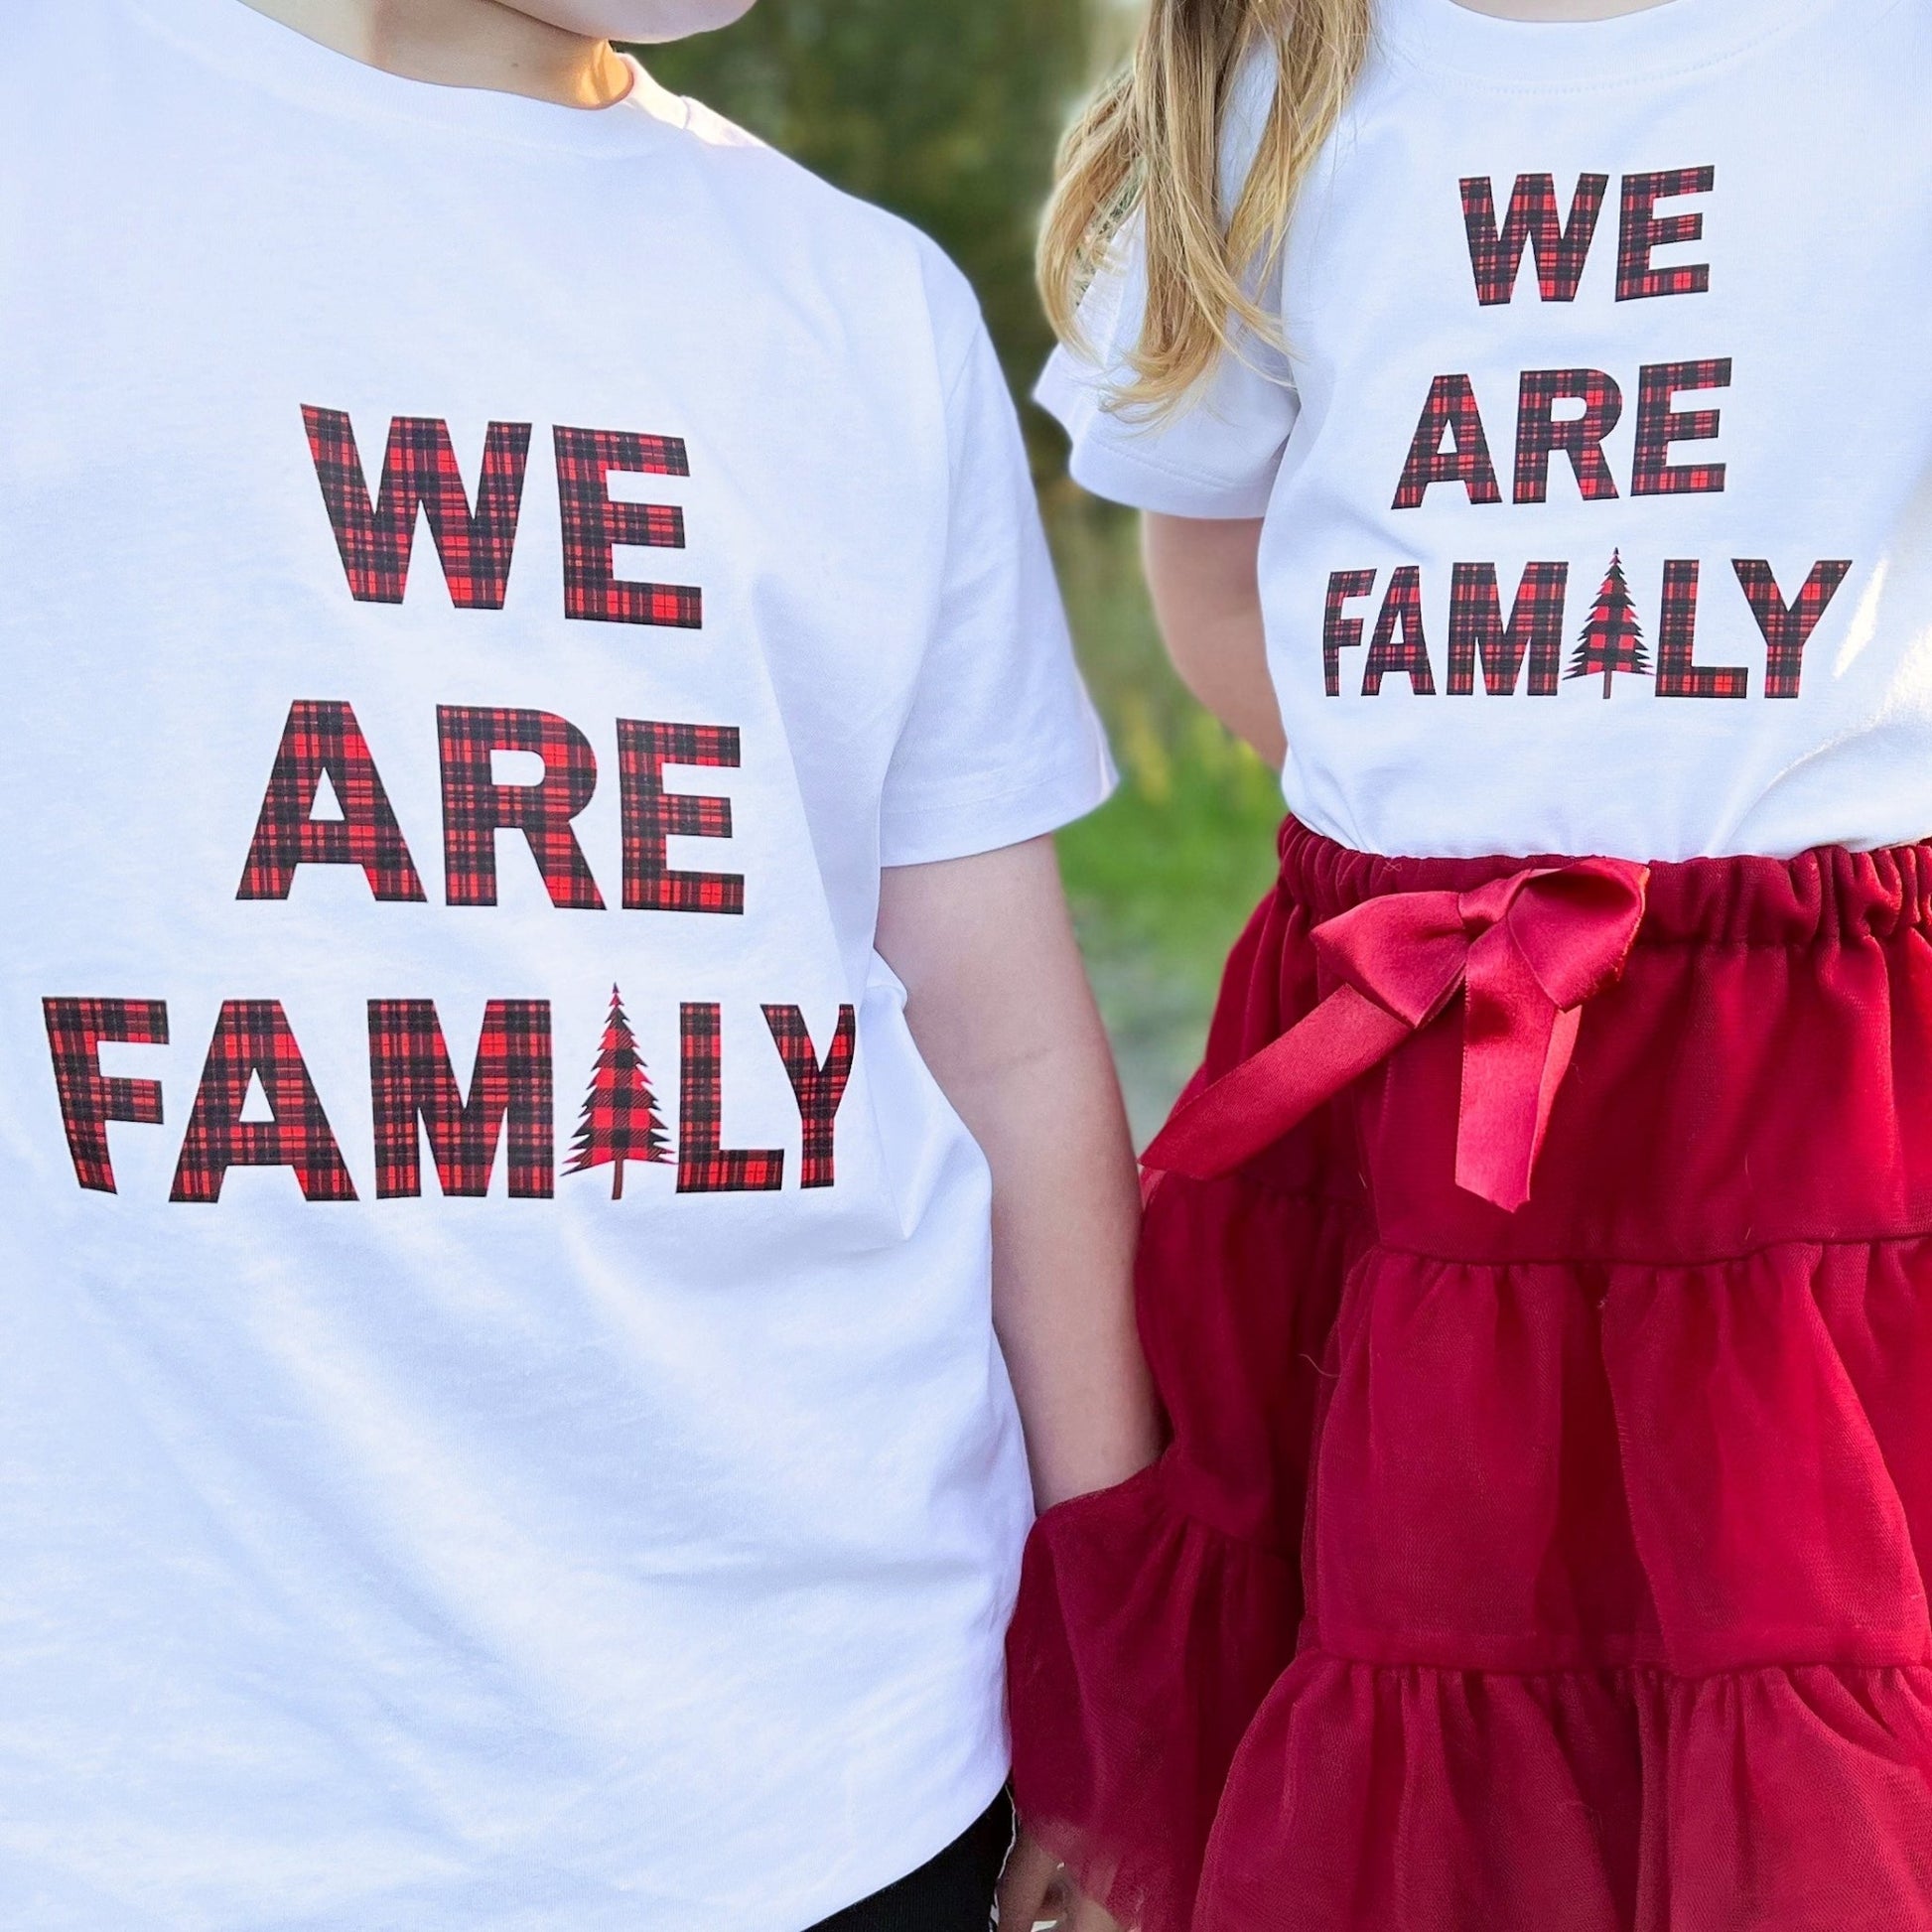 WE ARE FAMILY KIDS T-SHIRT - Toots Kids